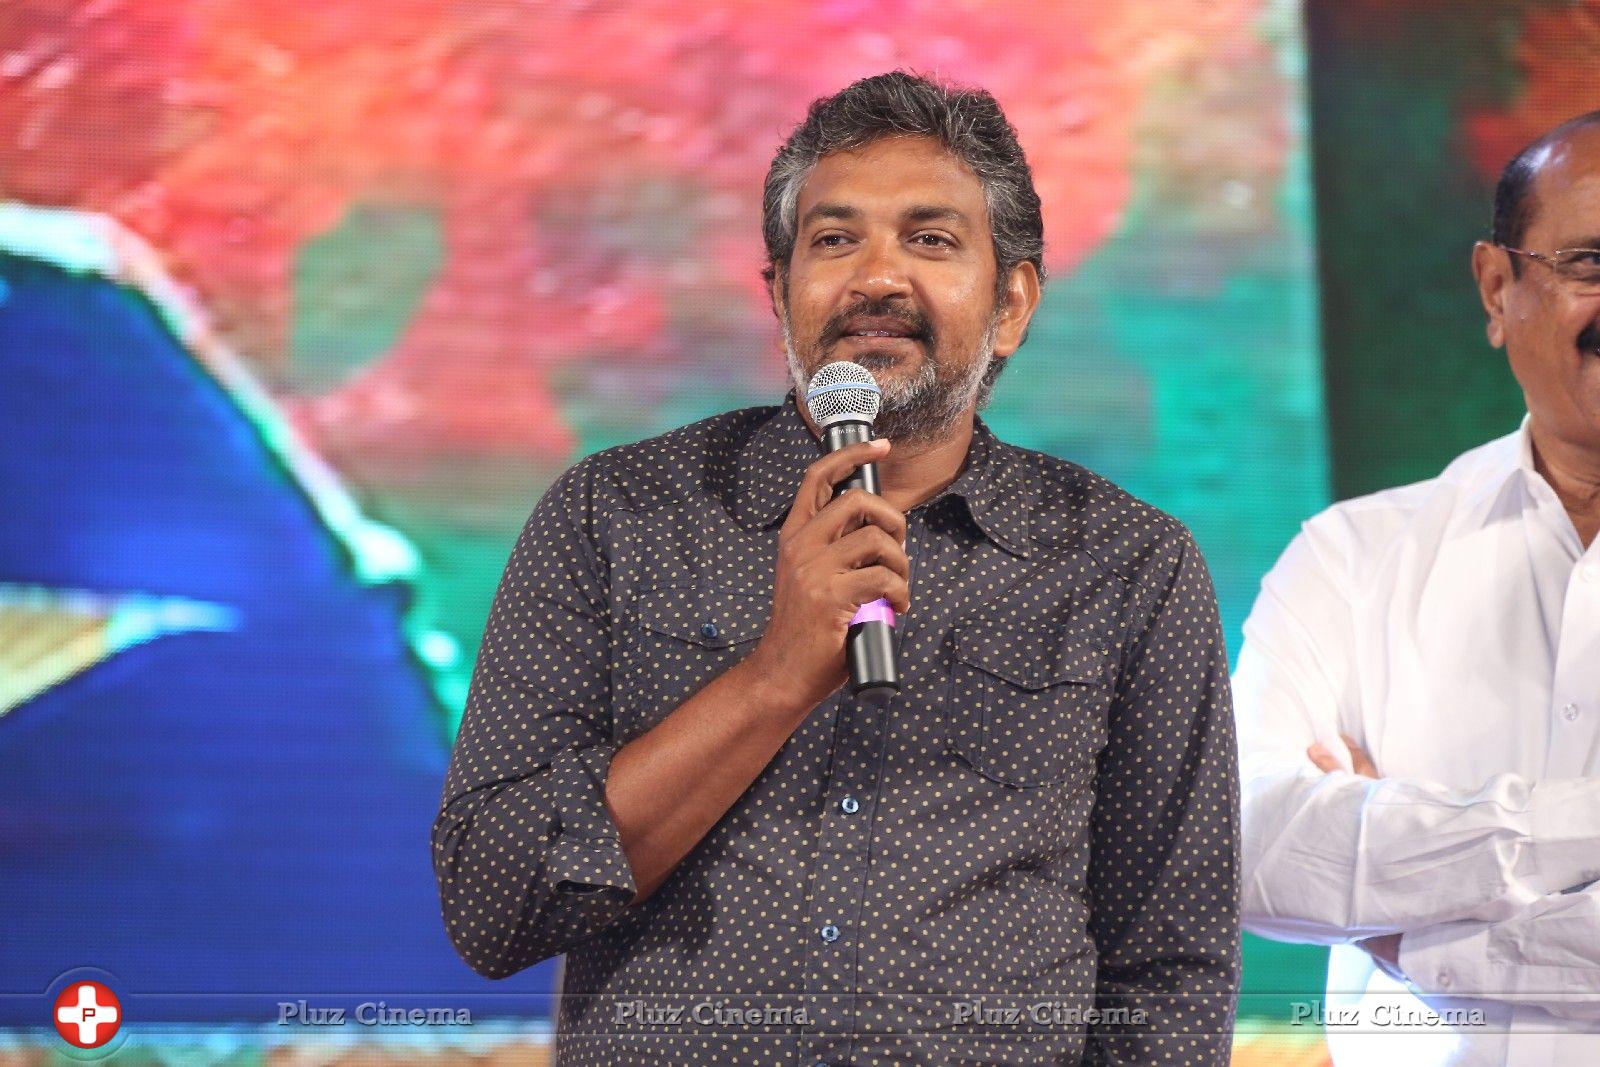 S. S. Rajamouli - Sikandar Audio Launch Function Photos | Picture 784985